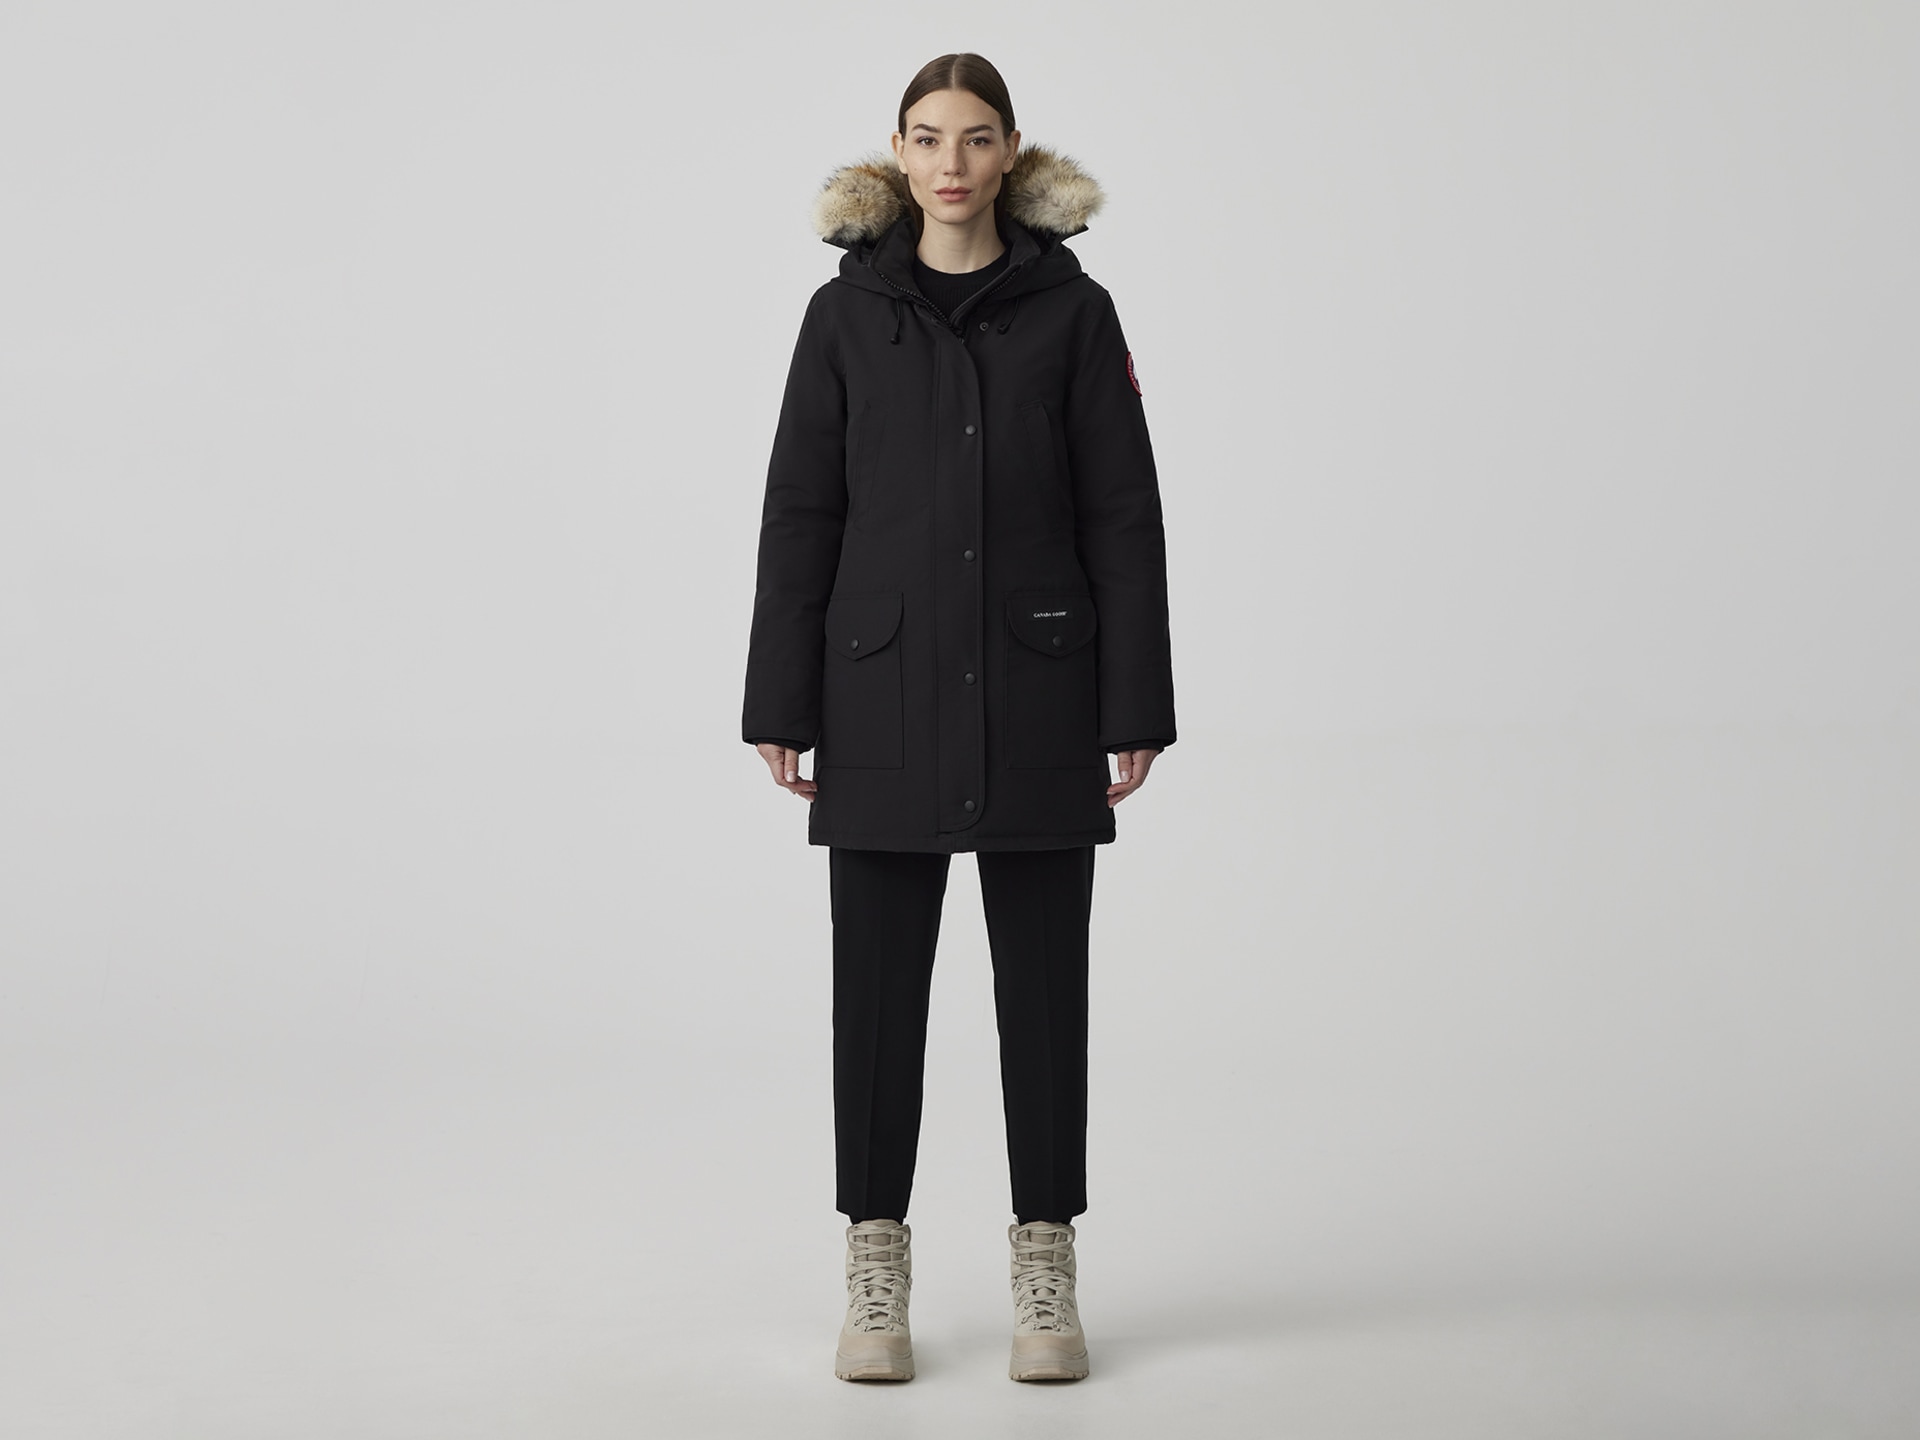 Unlock Wilderness' choice in the Woolrich Vs Canada Goose comparison, the Trillium Parka Heritage by Canada Goose